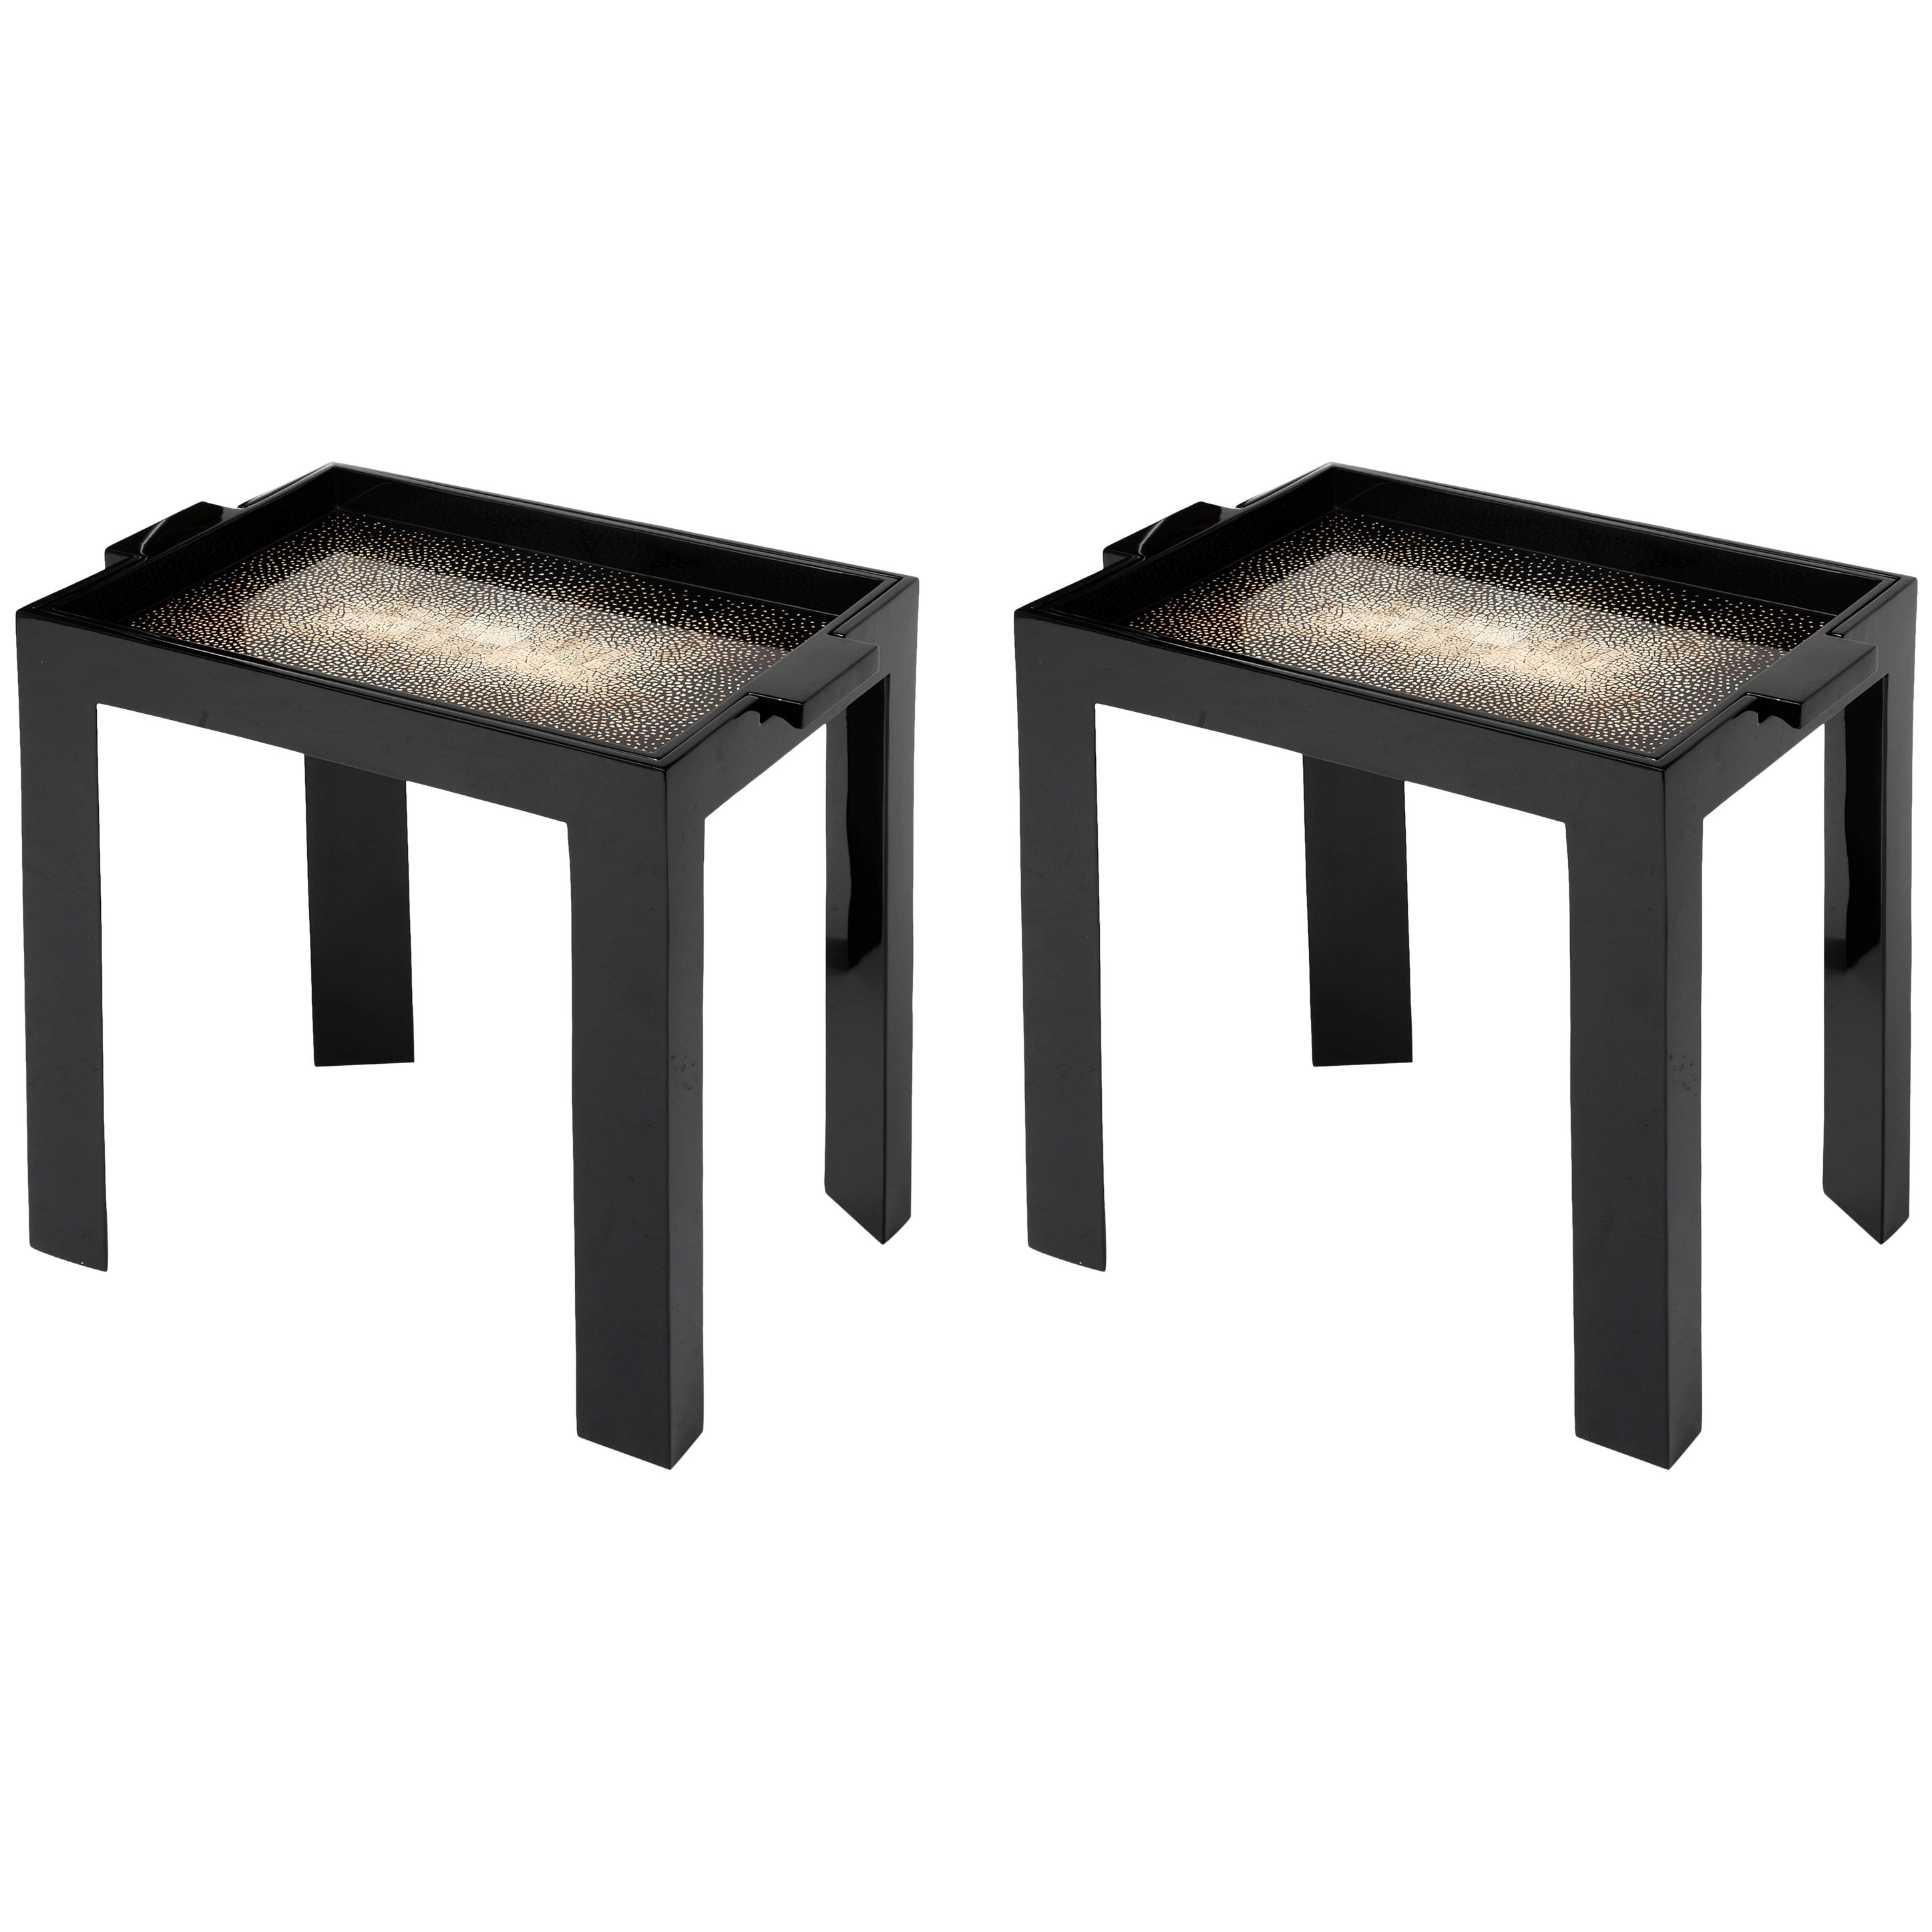 Contemporary Pair of Eggshell and Lacquer Table Trays